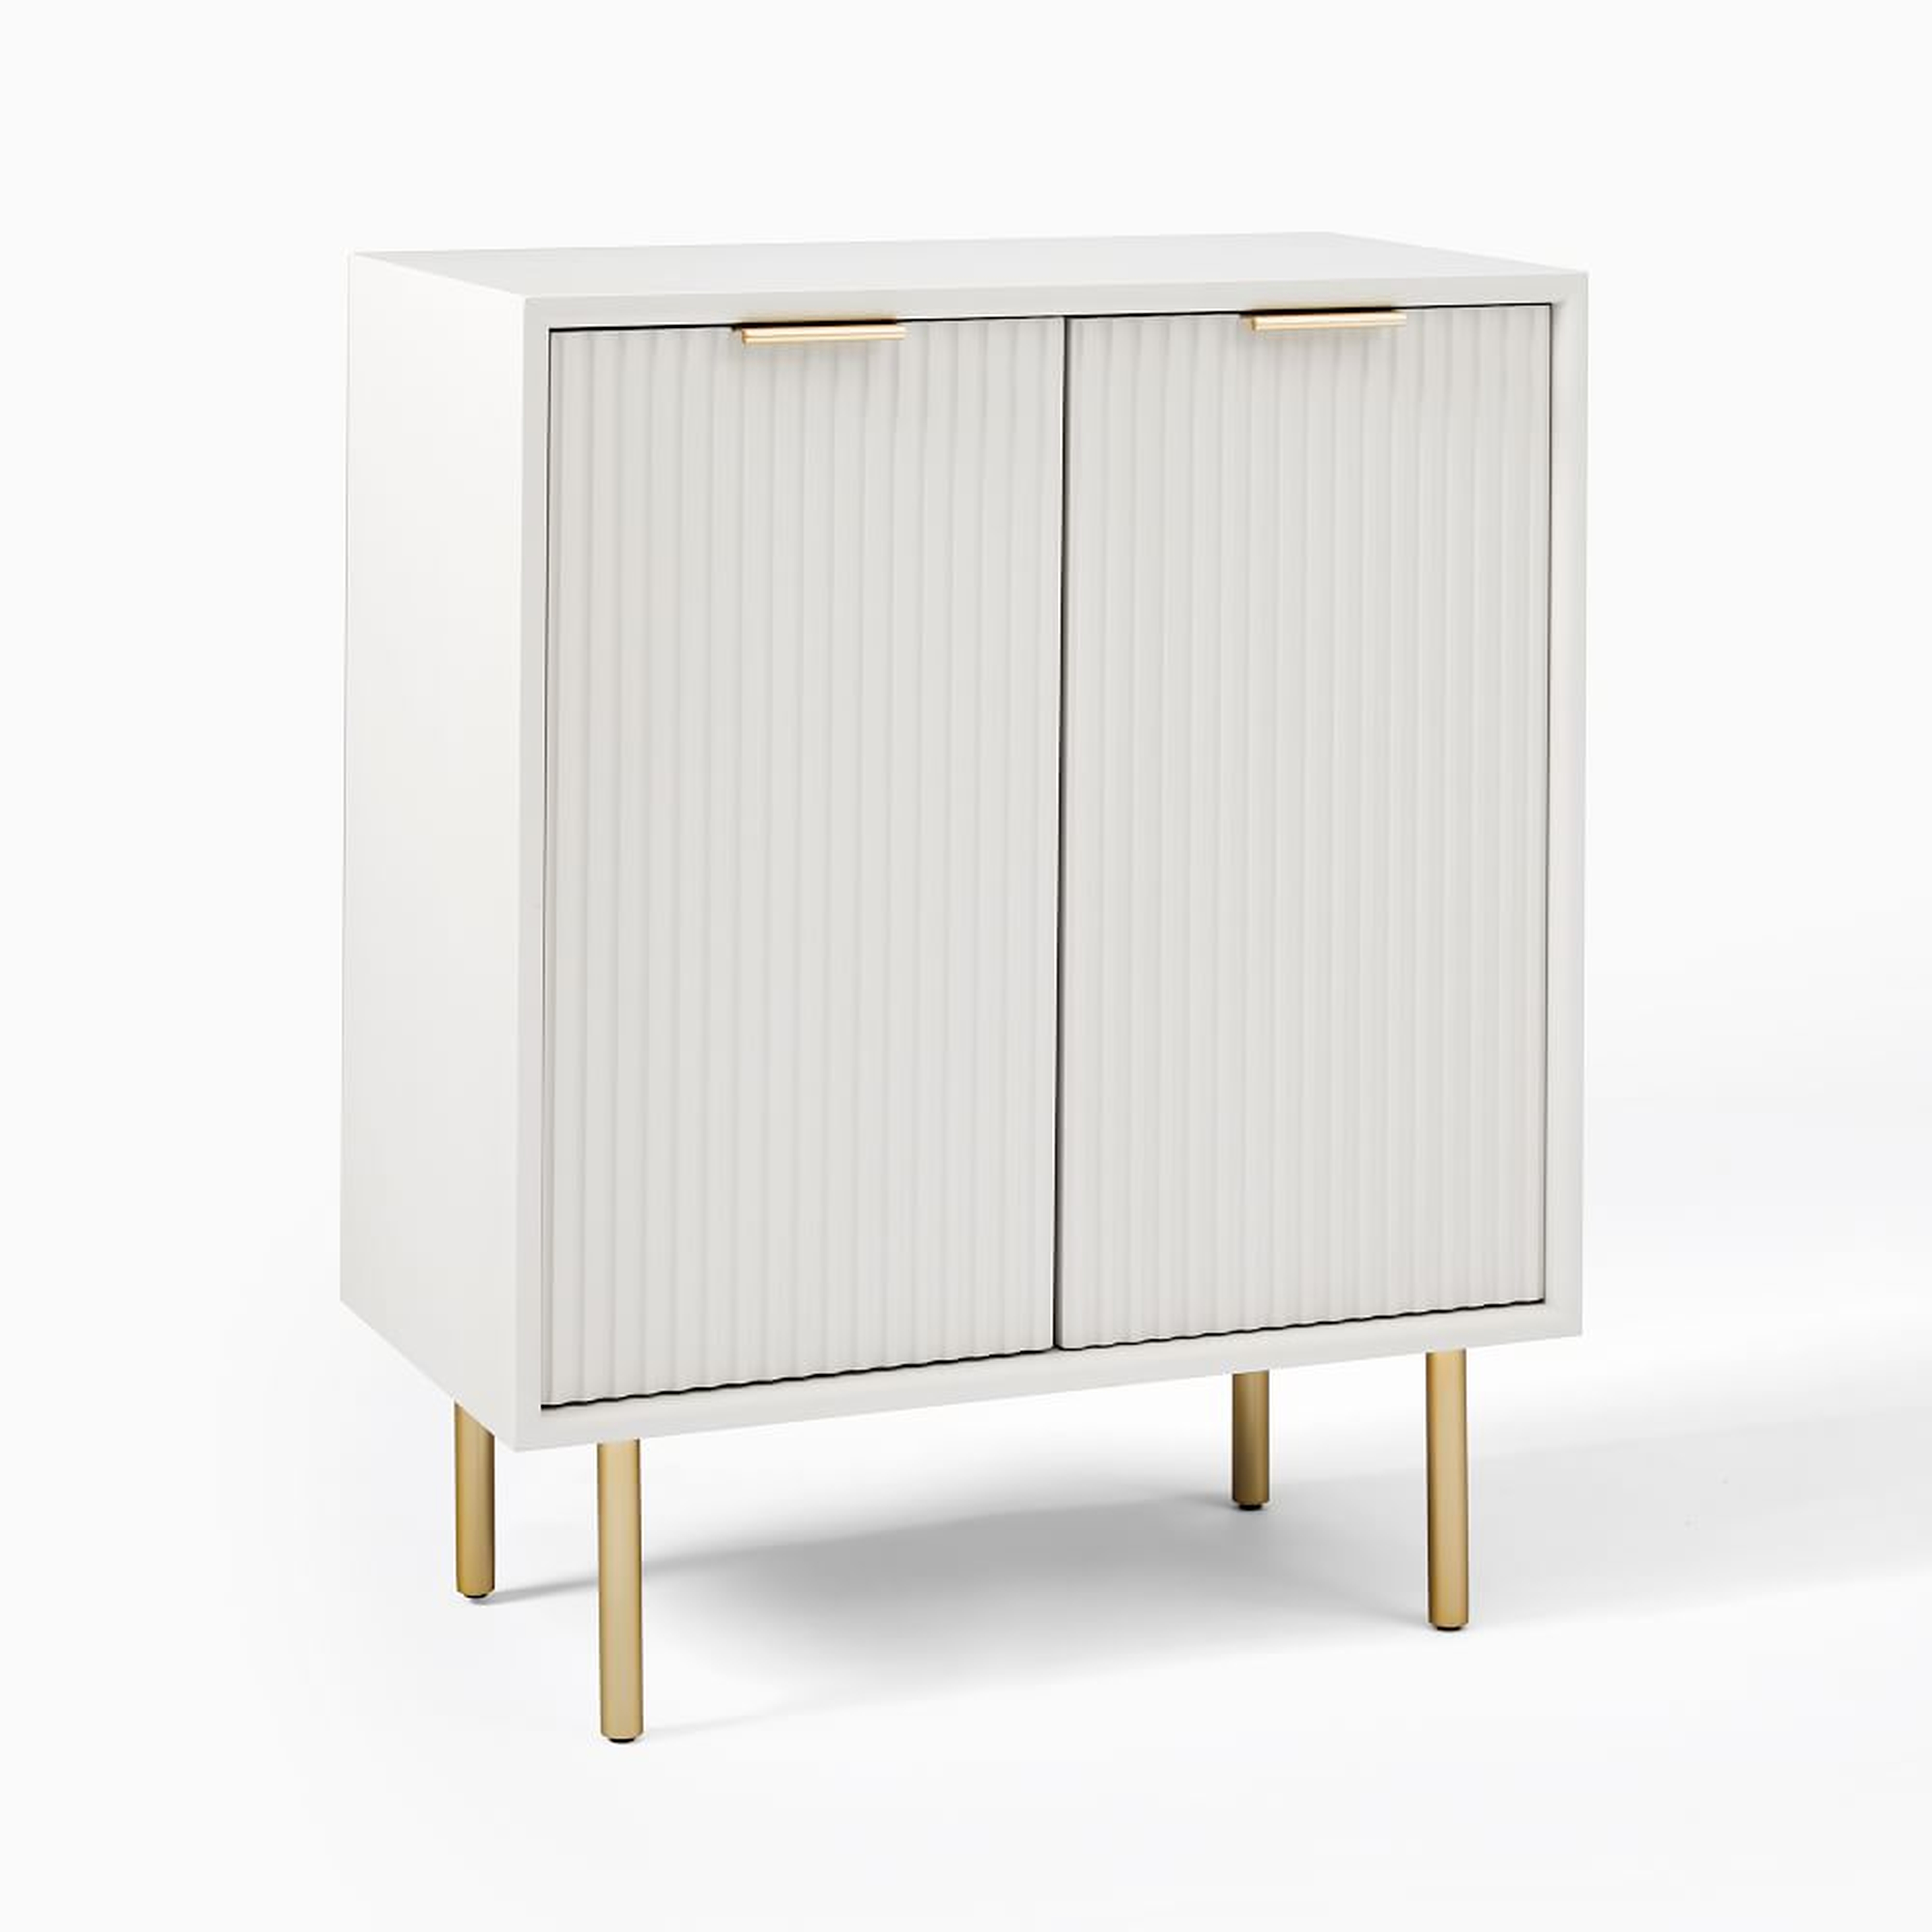 Entry Cabinet, White & Brass - West Elm